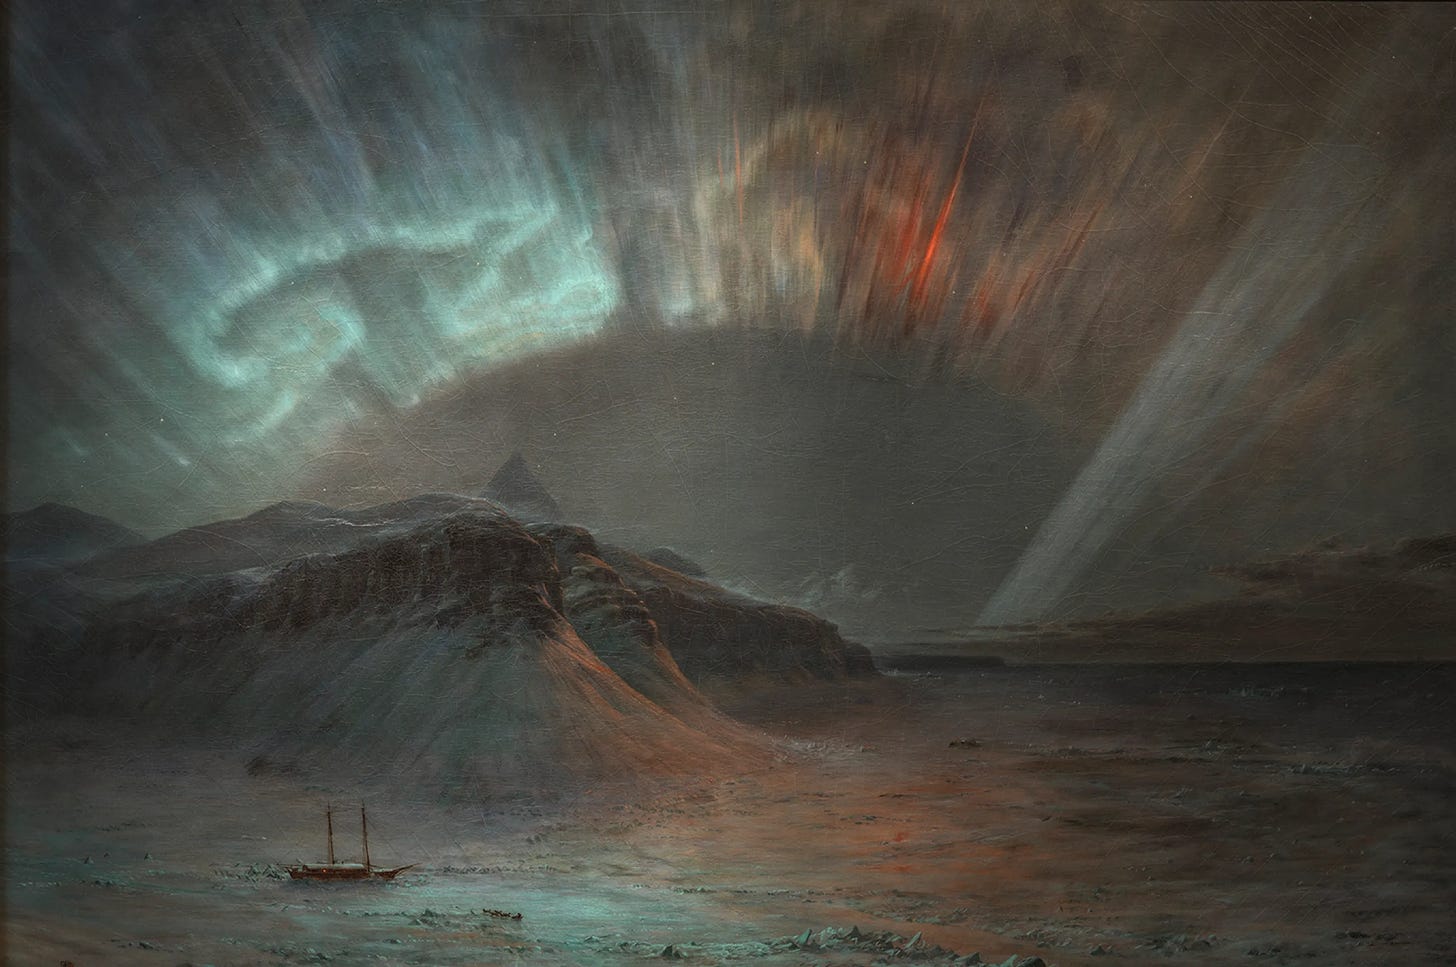 Image is a painting of the aurora borealis at night over dark mountains and an ice-covered sea, with an icebreaker ship at the bottom left that is diminished by the magnitude of its surroundings. 